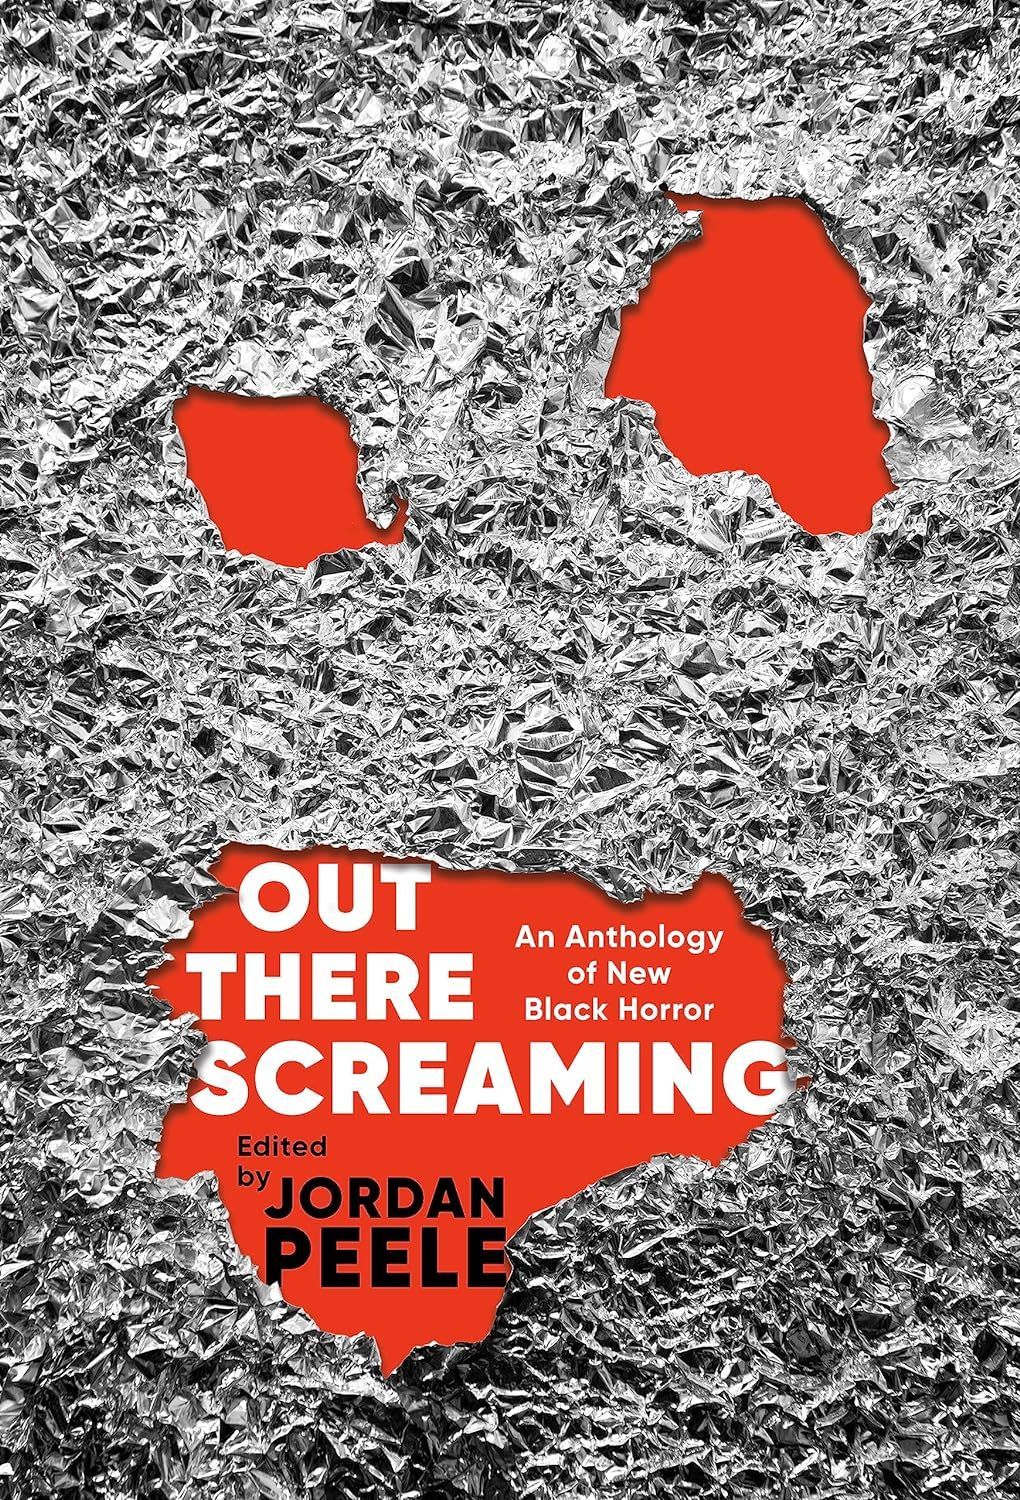 Screams with a Black Timbre: On Jordan Peele’s “Out There Screaming”